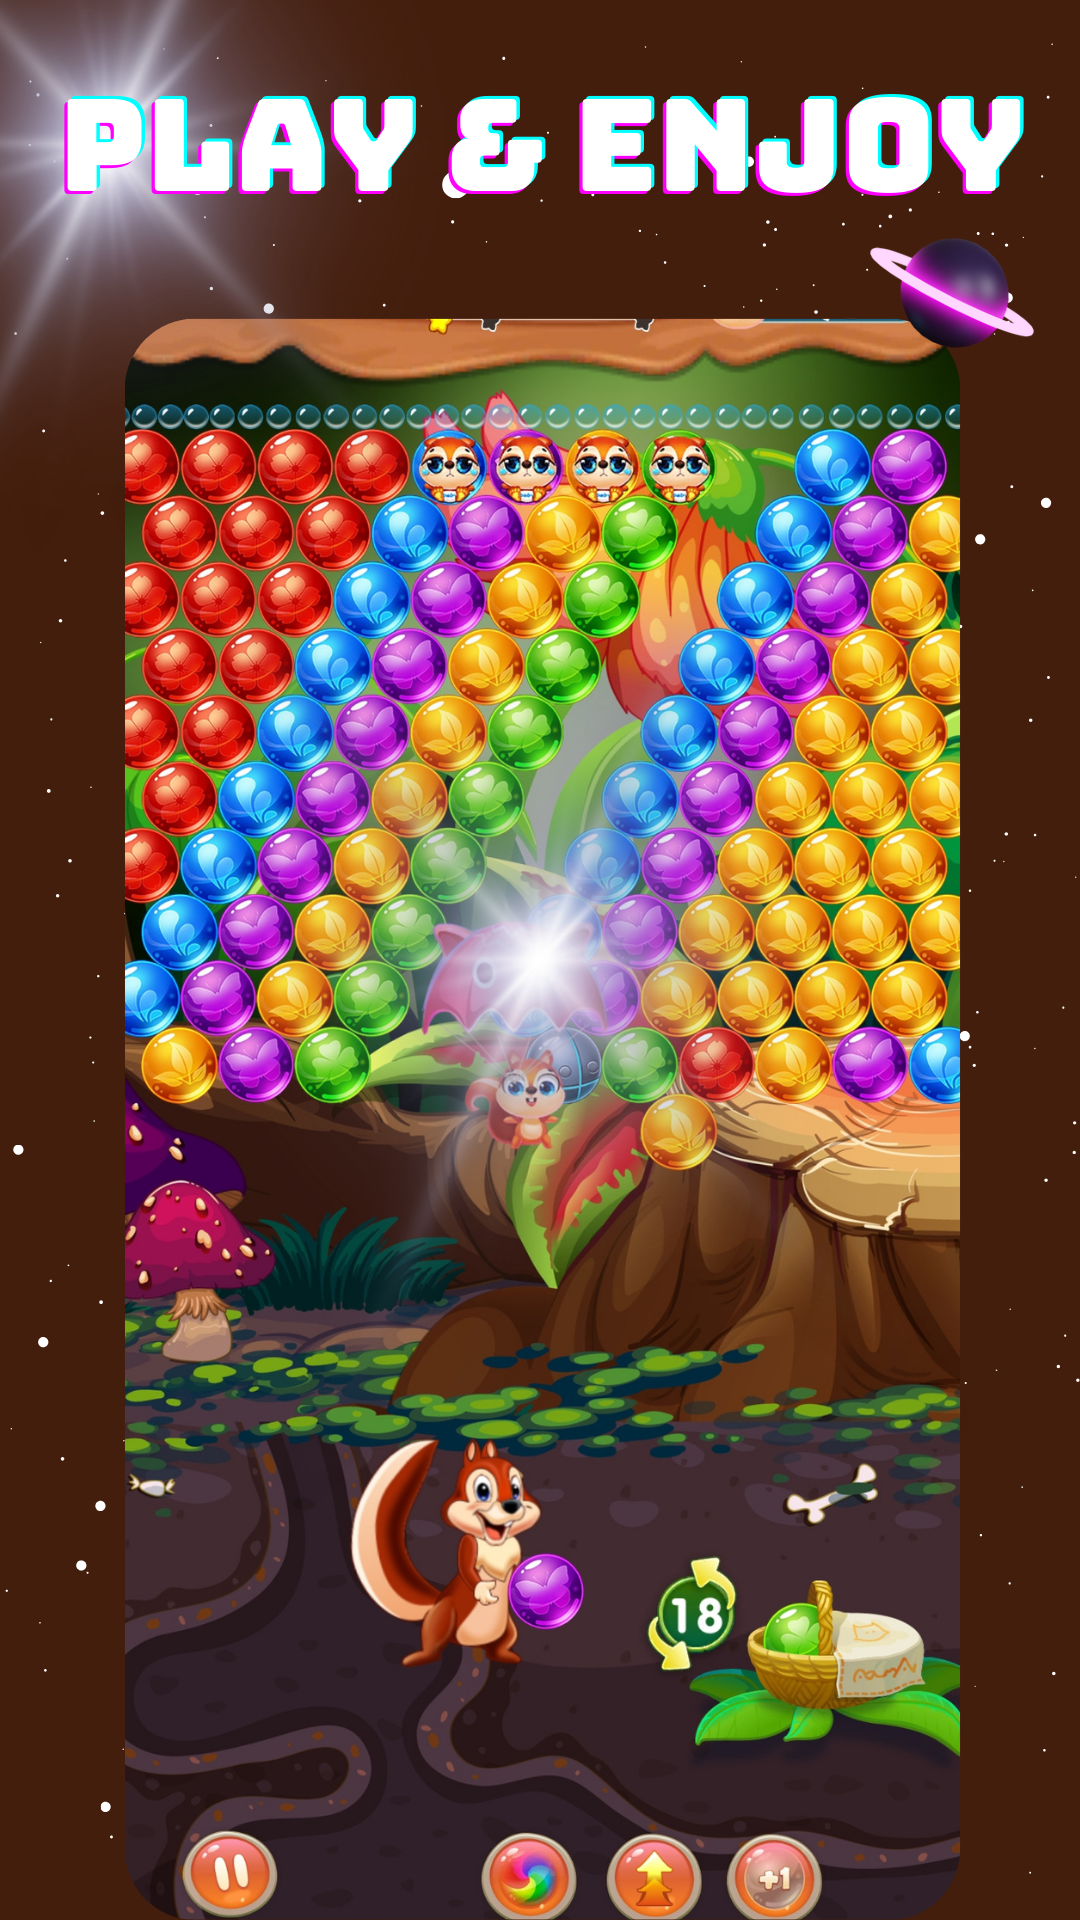 Bubble Shooter HD - APK Download for Android